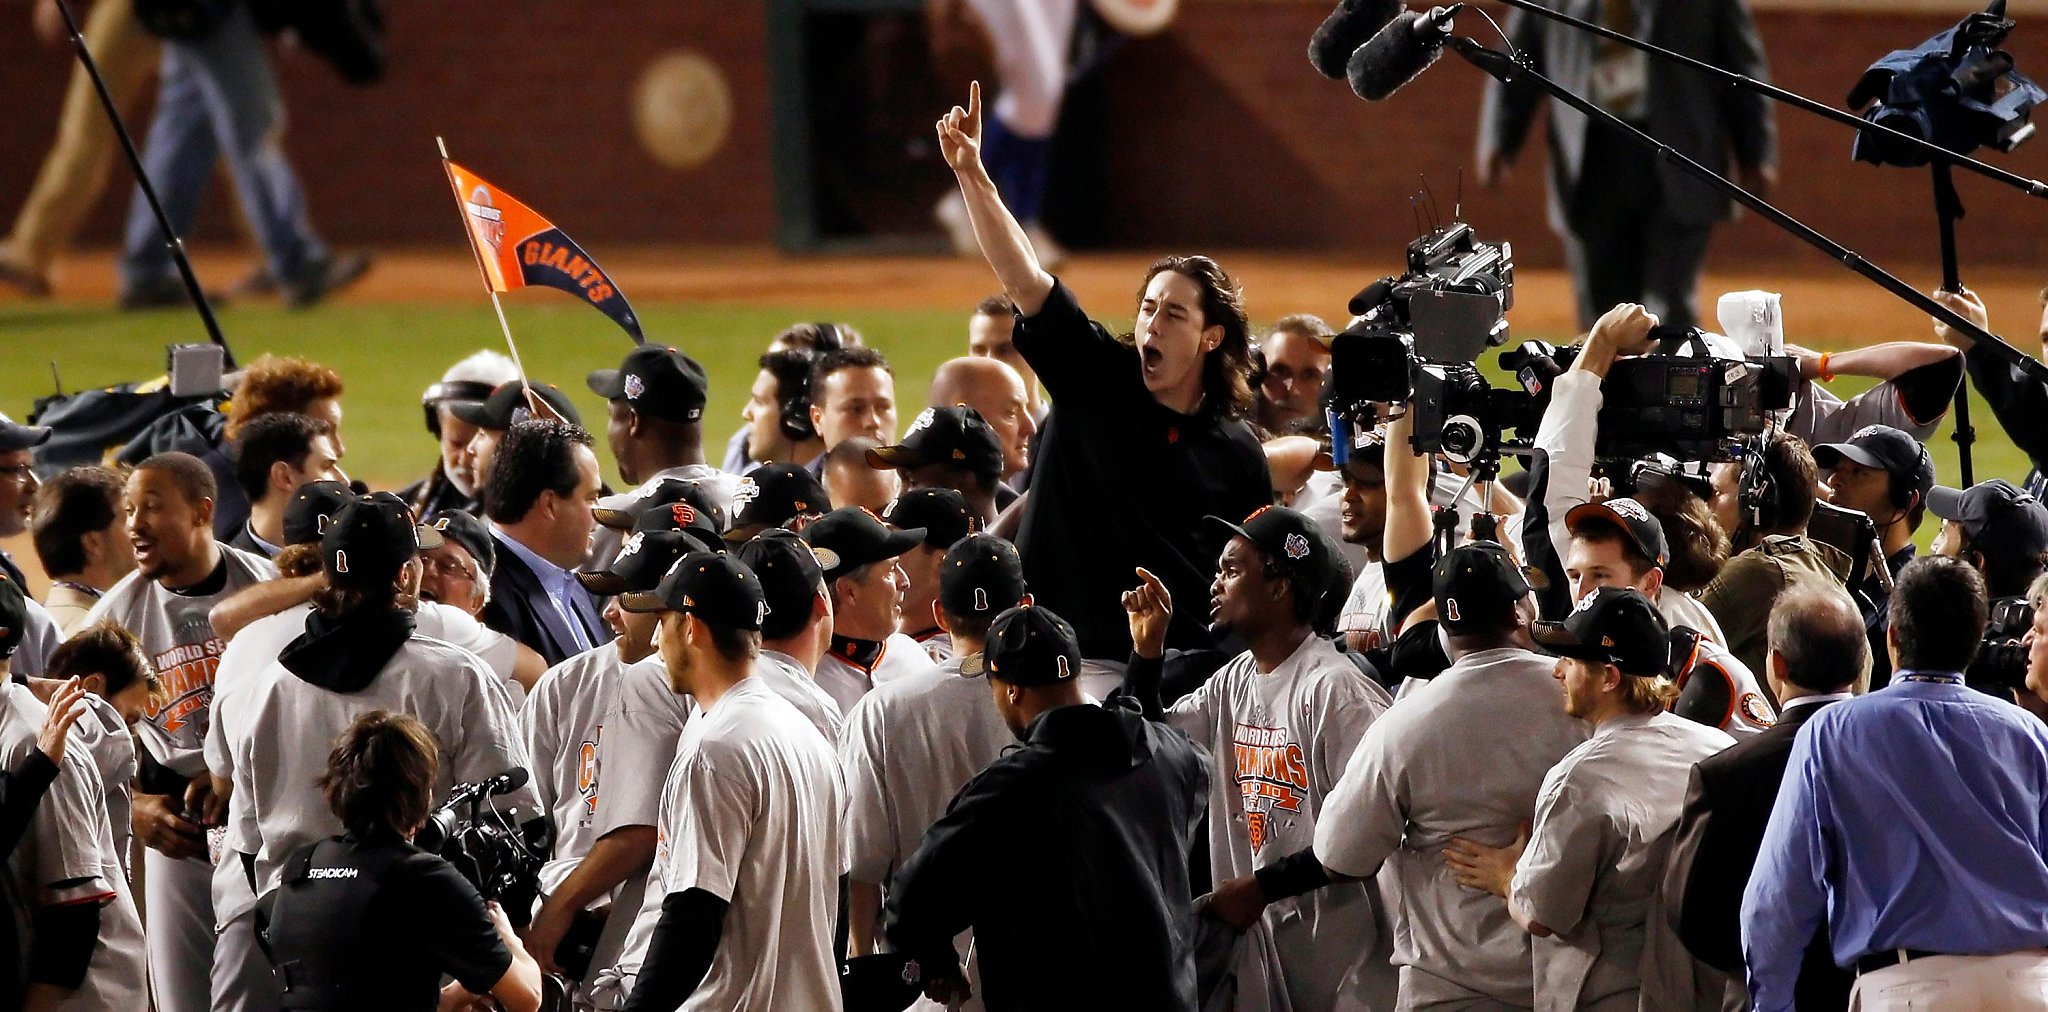 Posey, Lincecum won't attend SF Giants 2012 World Series reunion